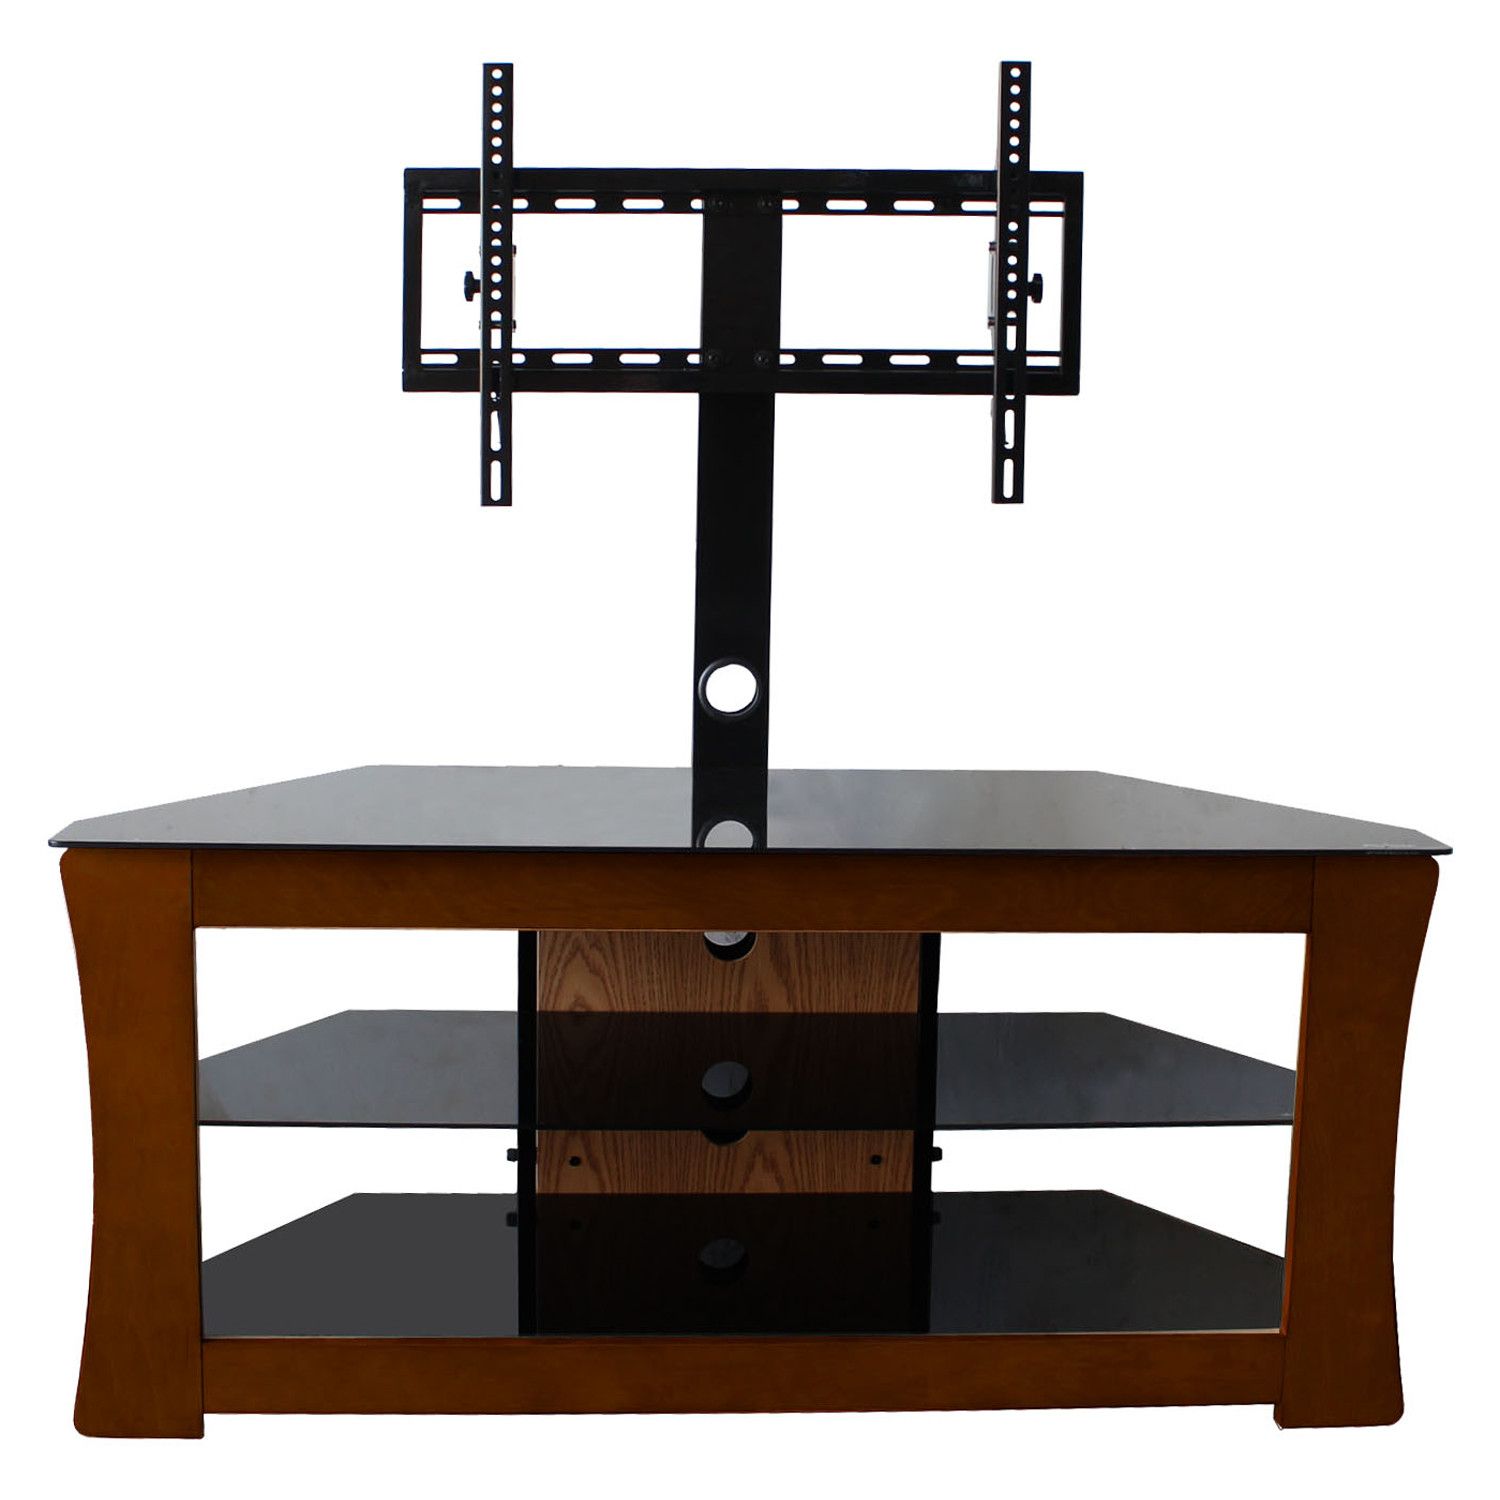 Cool Flat Screen Tv Stands With Mount | Homesfeed For Stand For Flat Screen (Gallery 18 of 20)